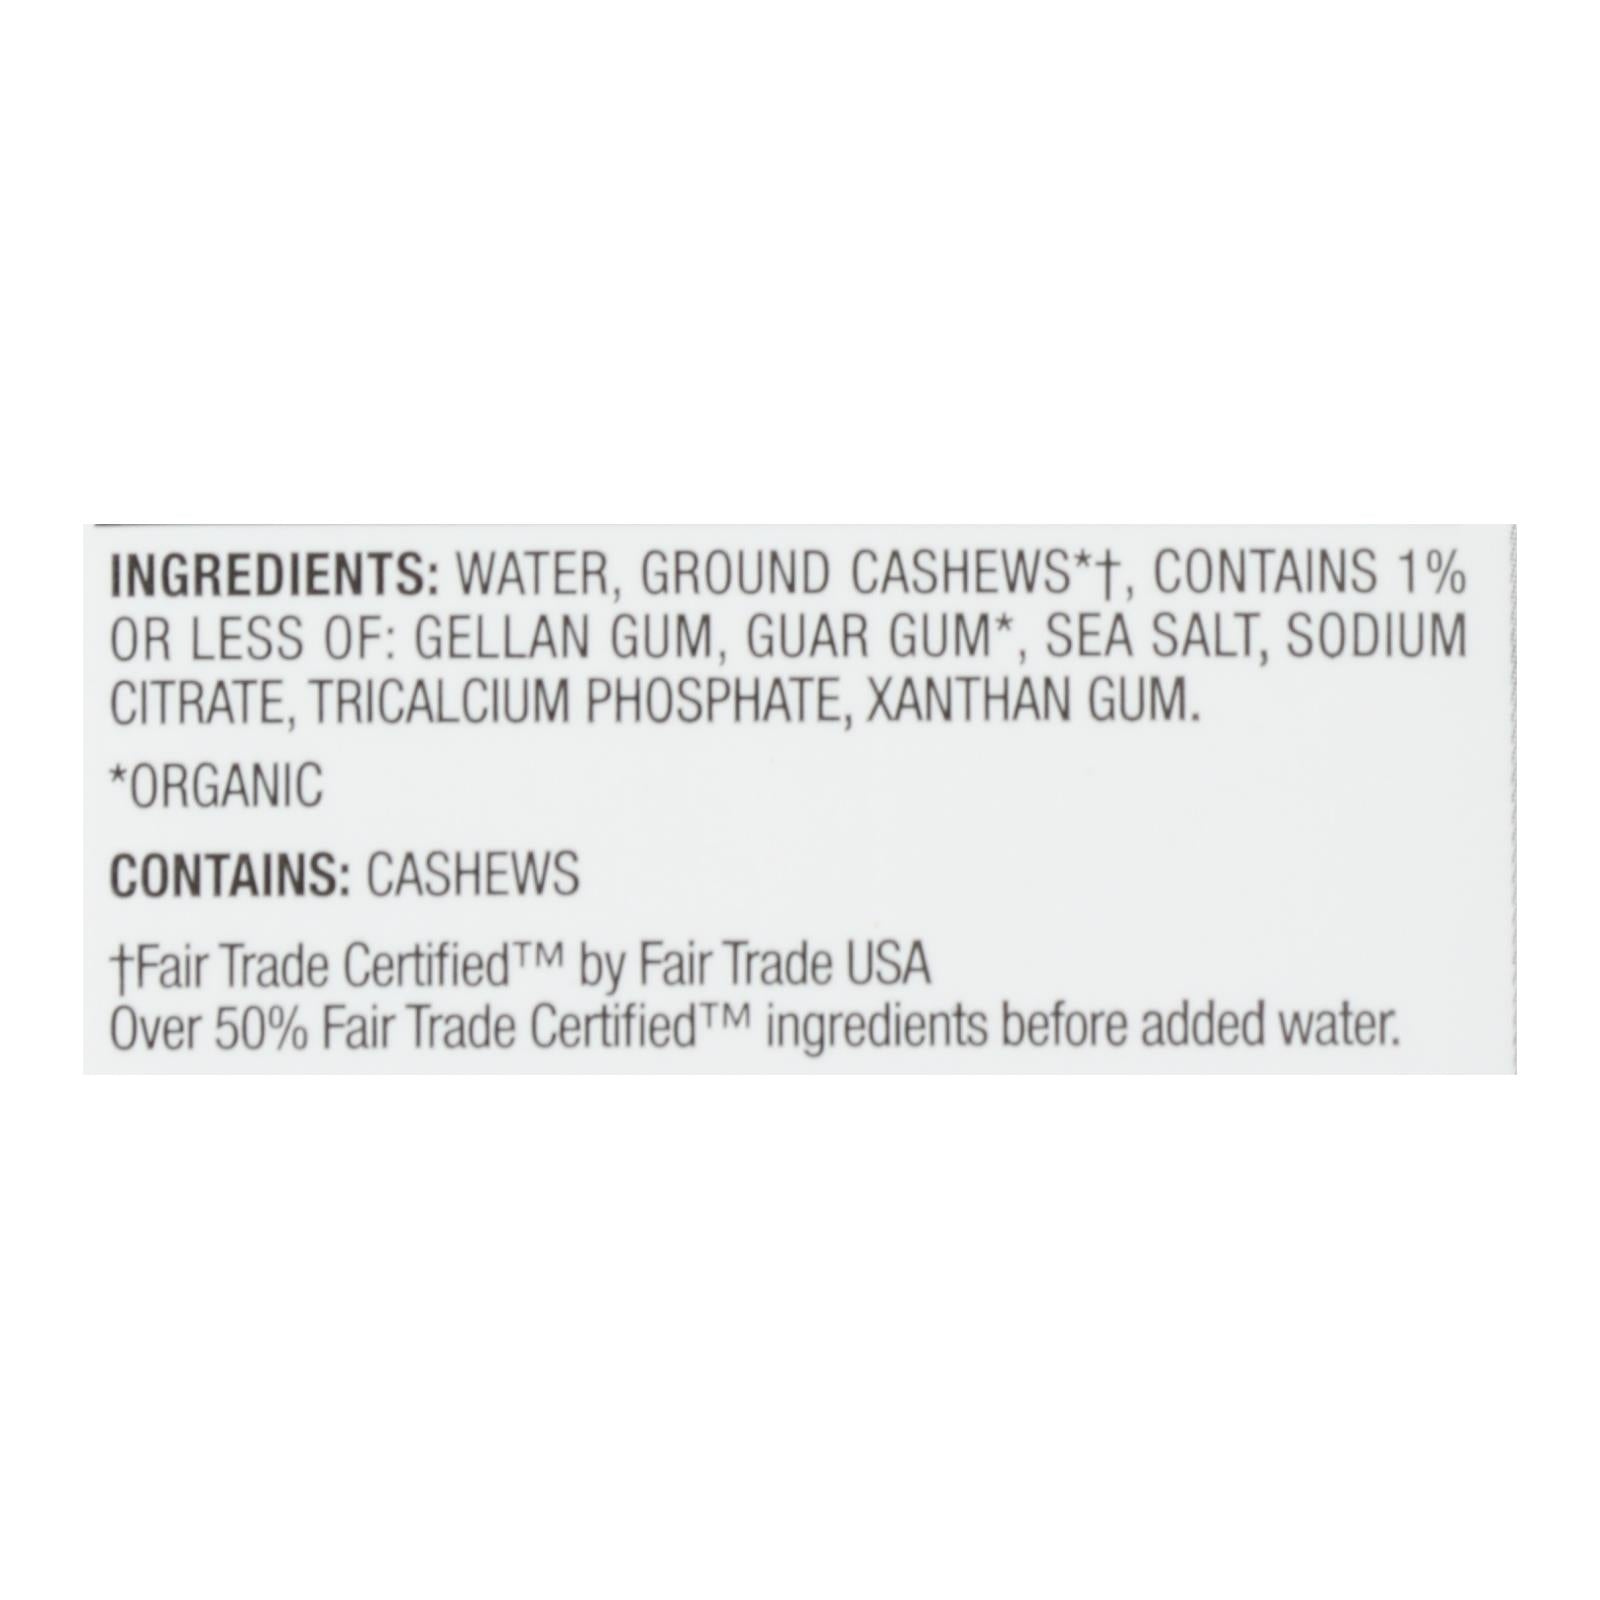 Pacific Natural Foods Cashew Beverage - Organic - Unsweetened- Case Of 6 - 32 Fl Oz